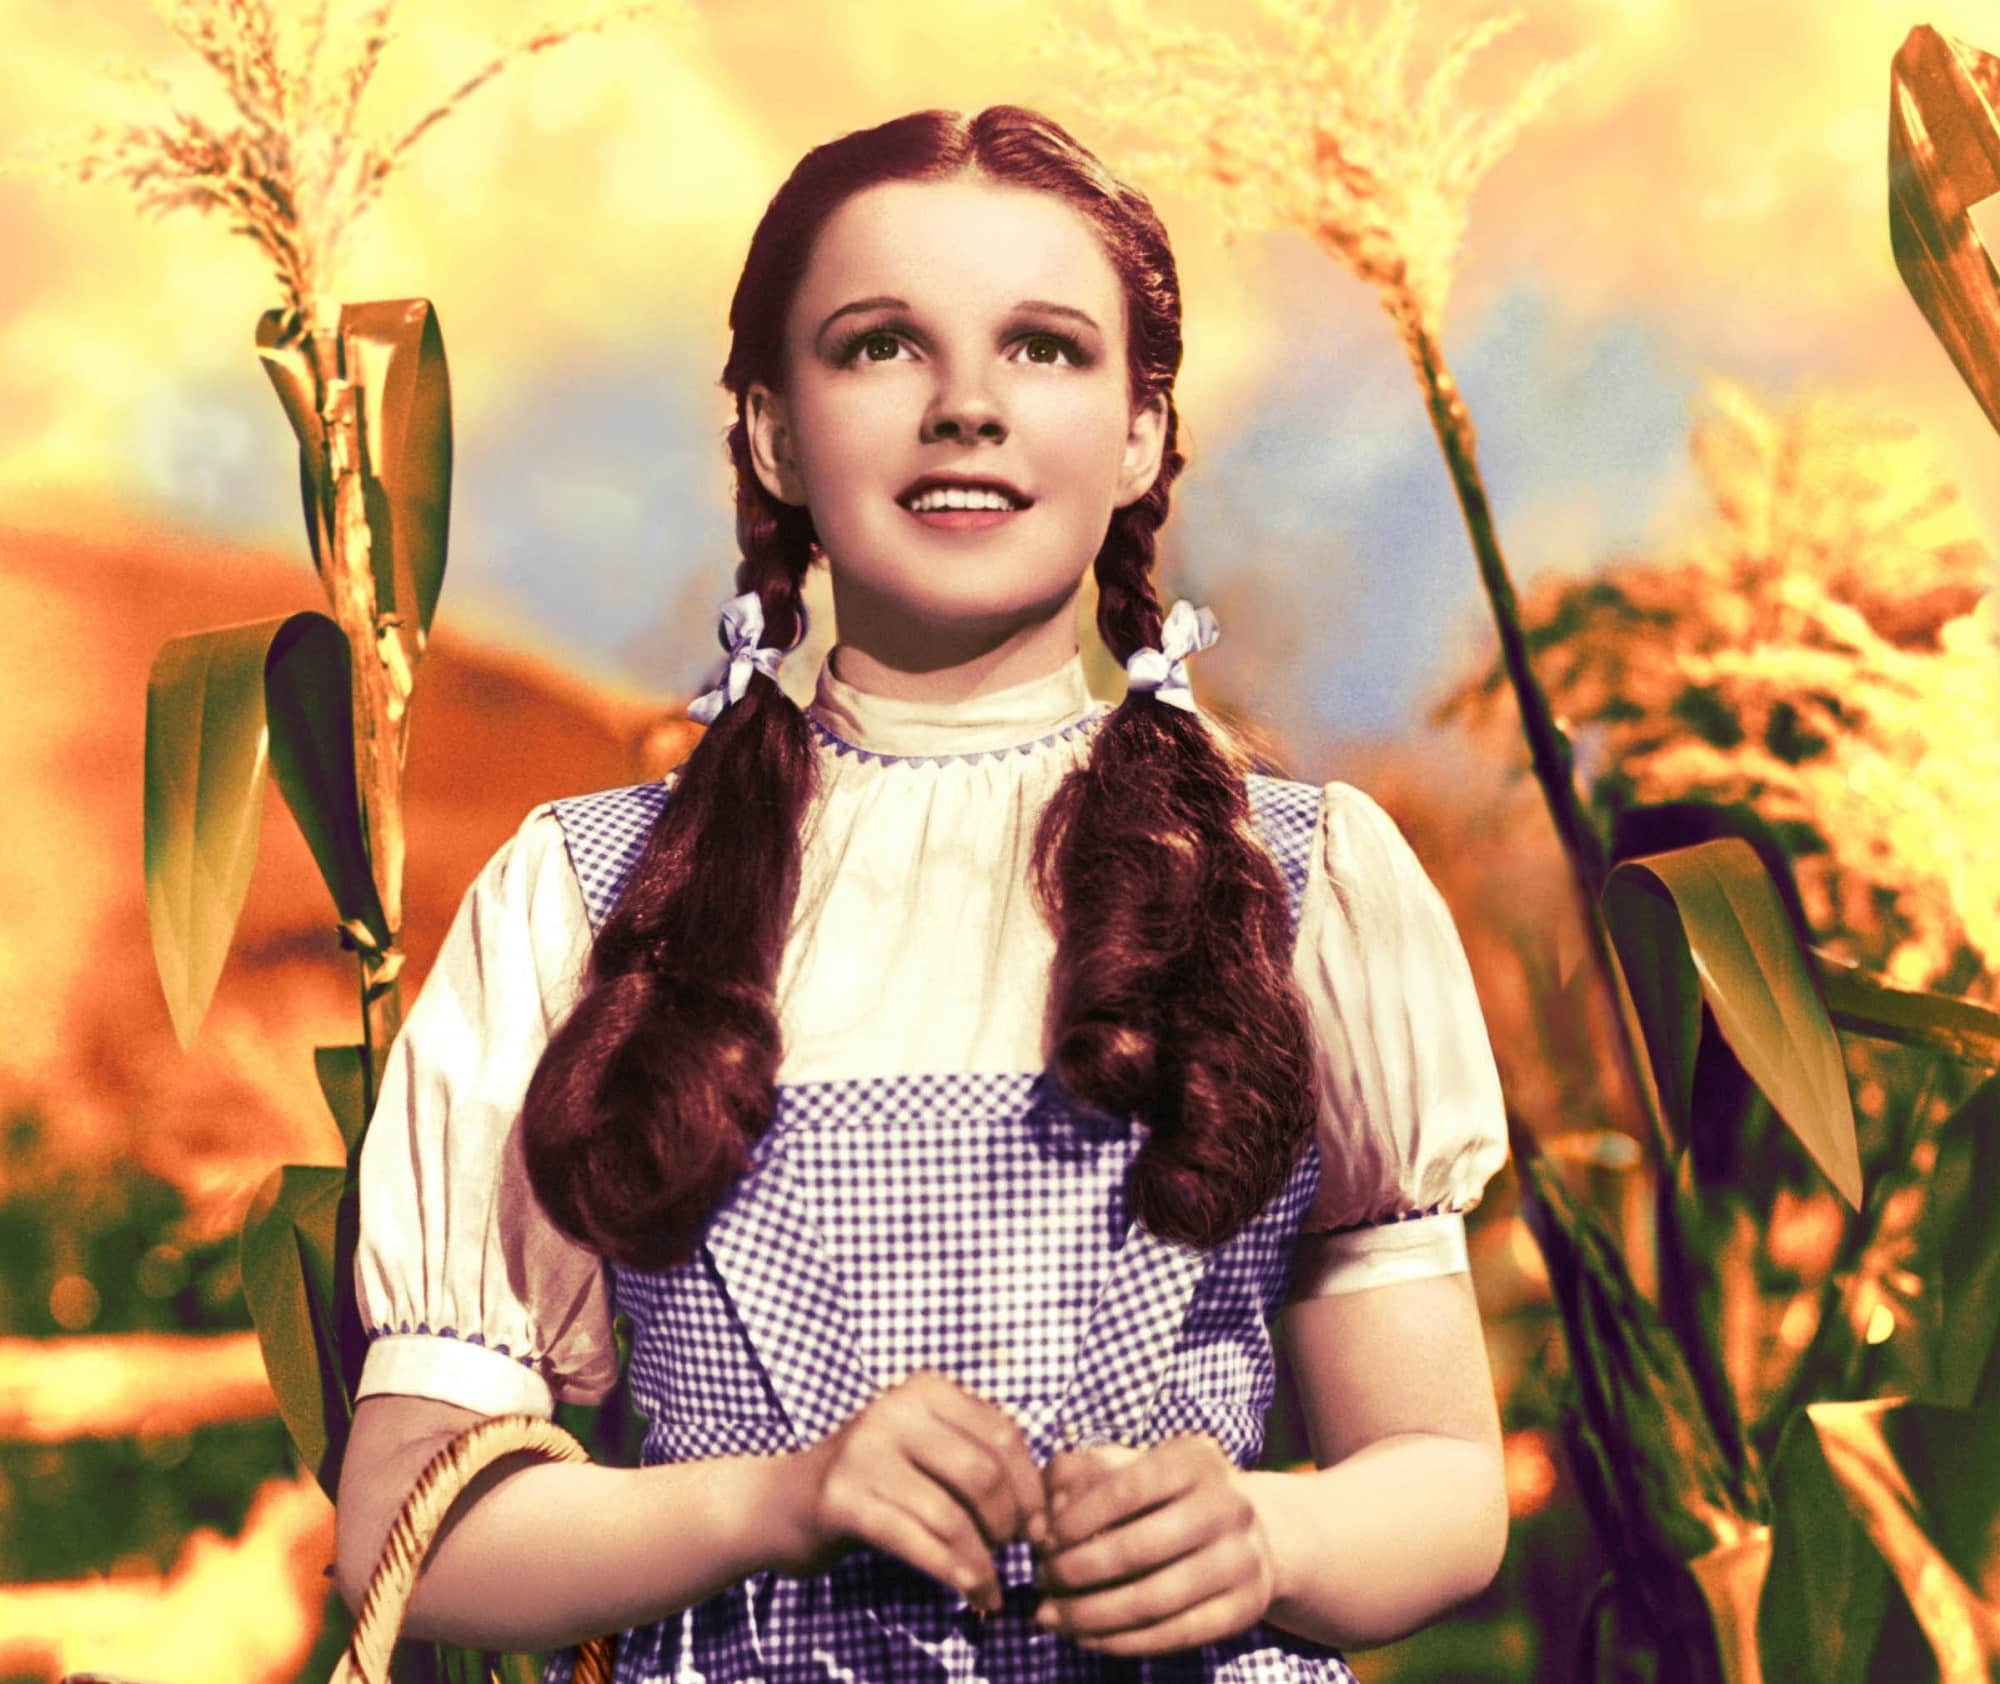 The Wizard of Oz': How Old Was Judy Garland When She Played Dorothy?